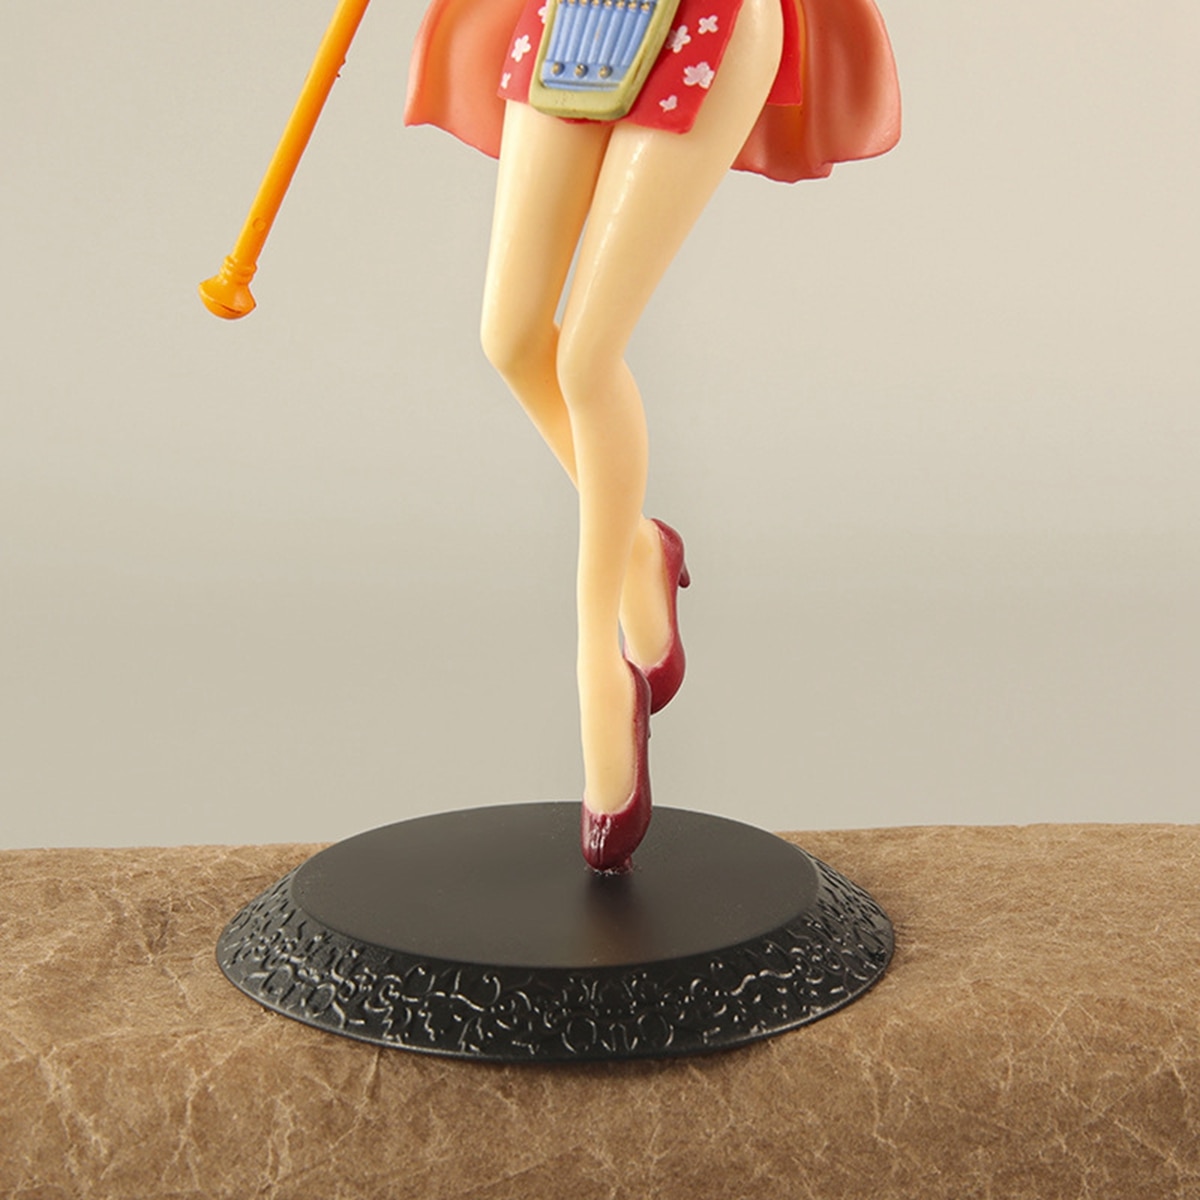 Anime One Piece Nami Figure Diva Stick Model Toy Gift Collection 23CM Luffy Action Figure Collection 3 - One Piece Store